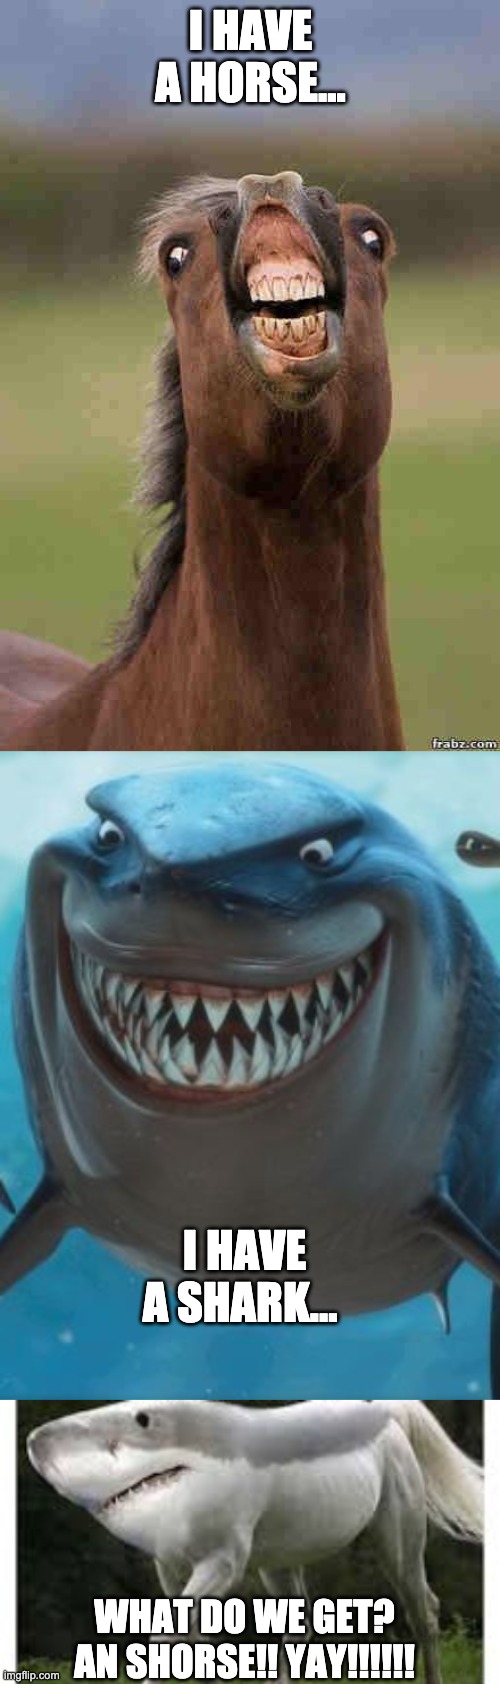 Shorse | I HAVE A HORSE... I HAVE A SHARK... WHAT DO WE GET?
AN SHORSE!! YAY!!!!!! | image tagged in horse face,finding nemo sharks | made w/ Imgflip meme maker